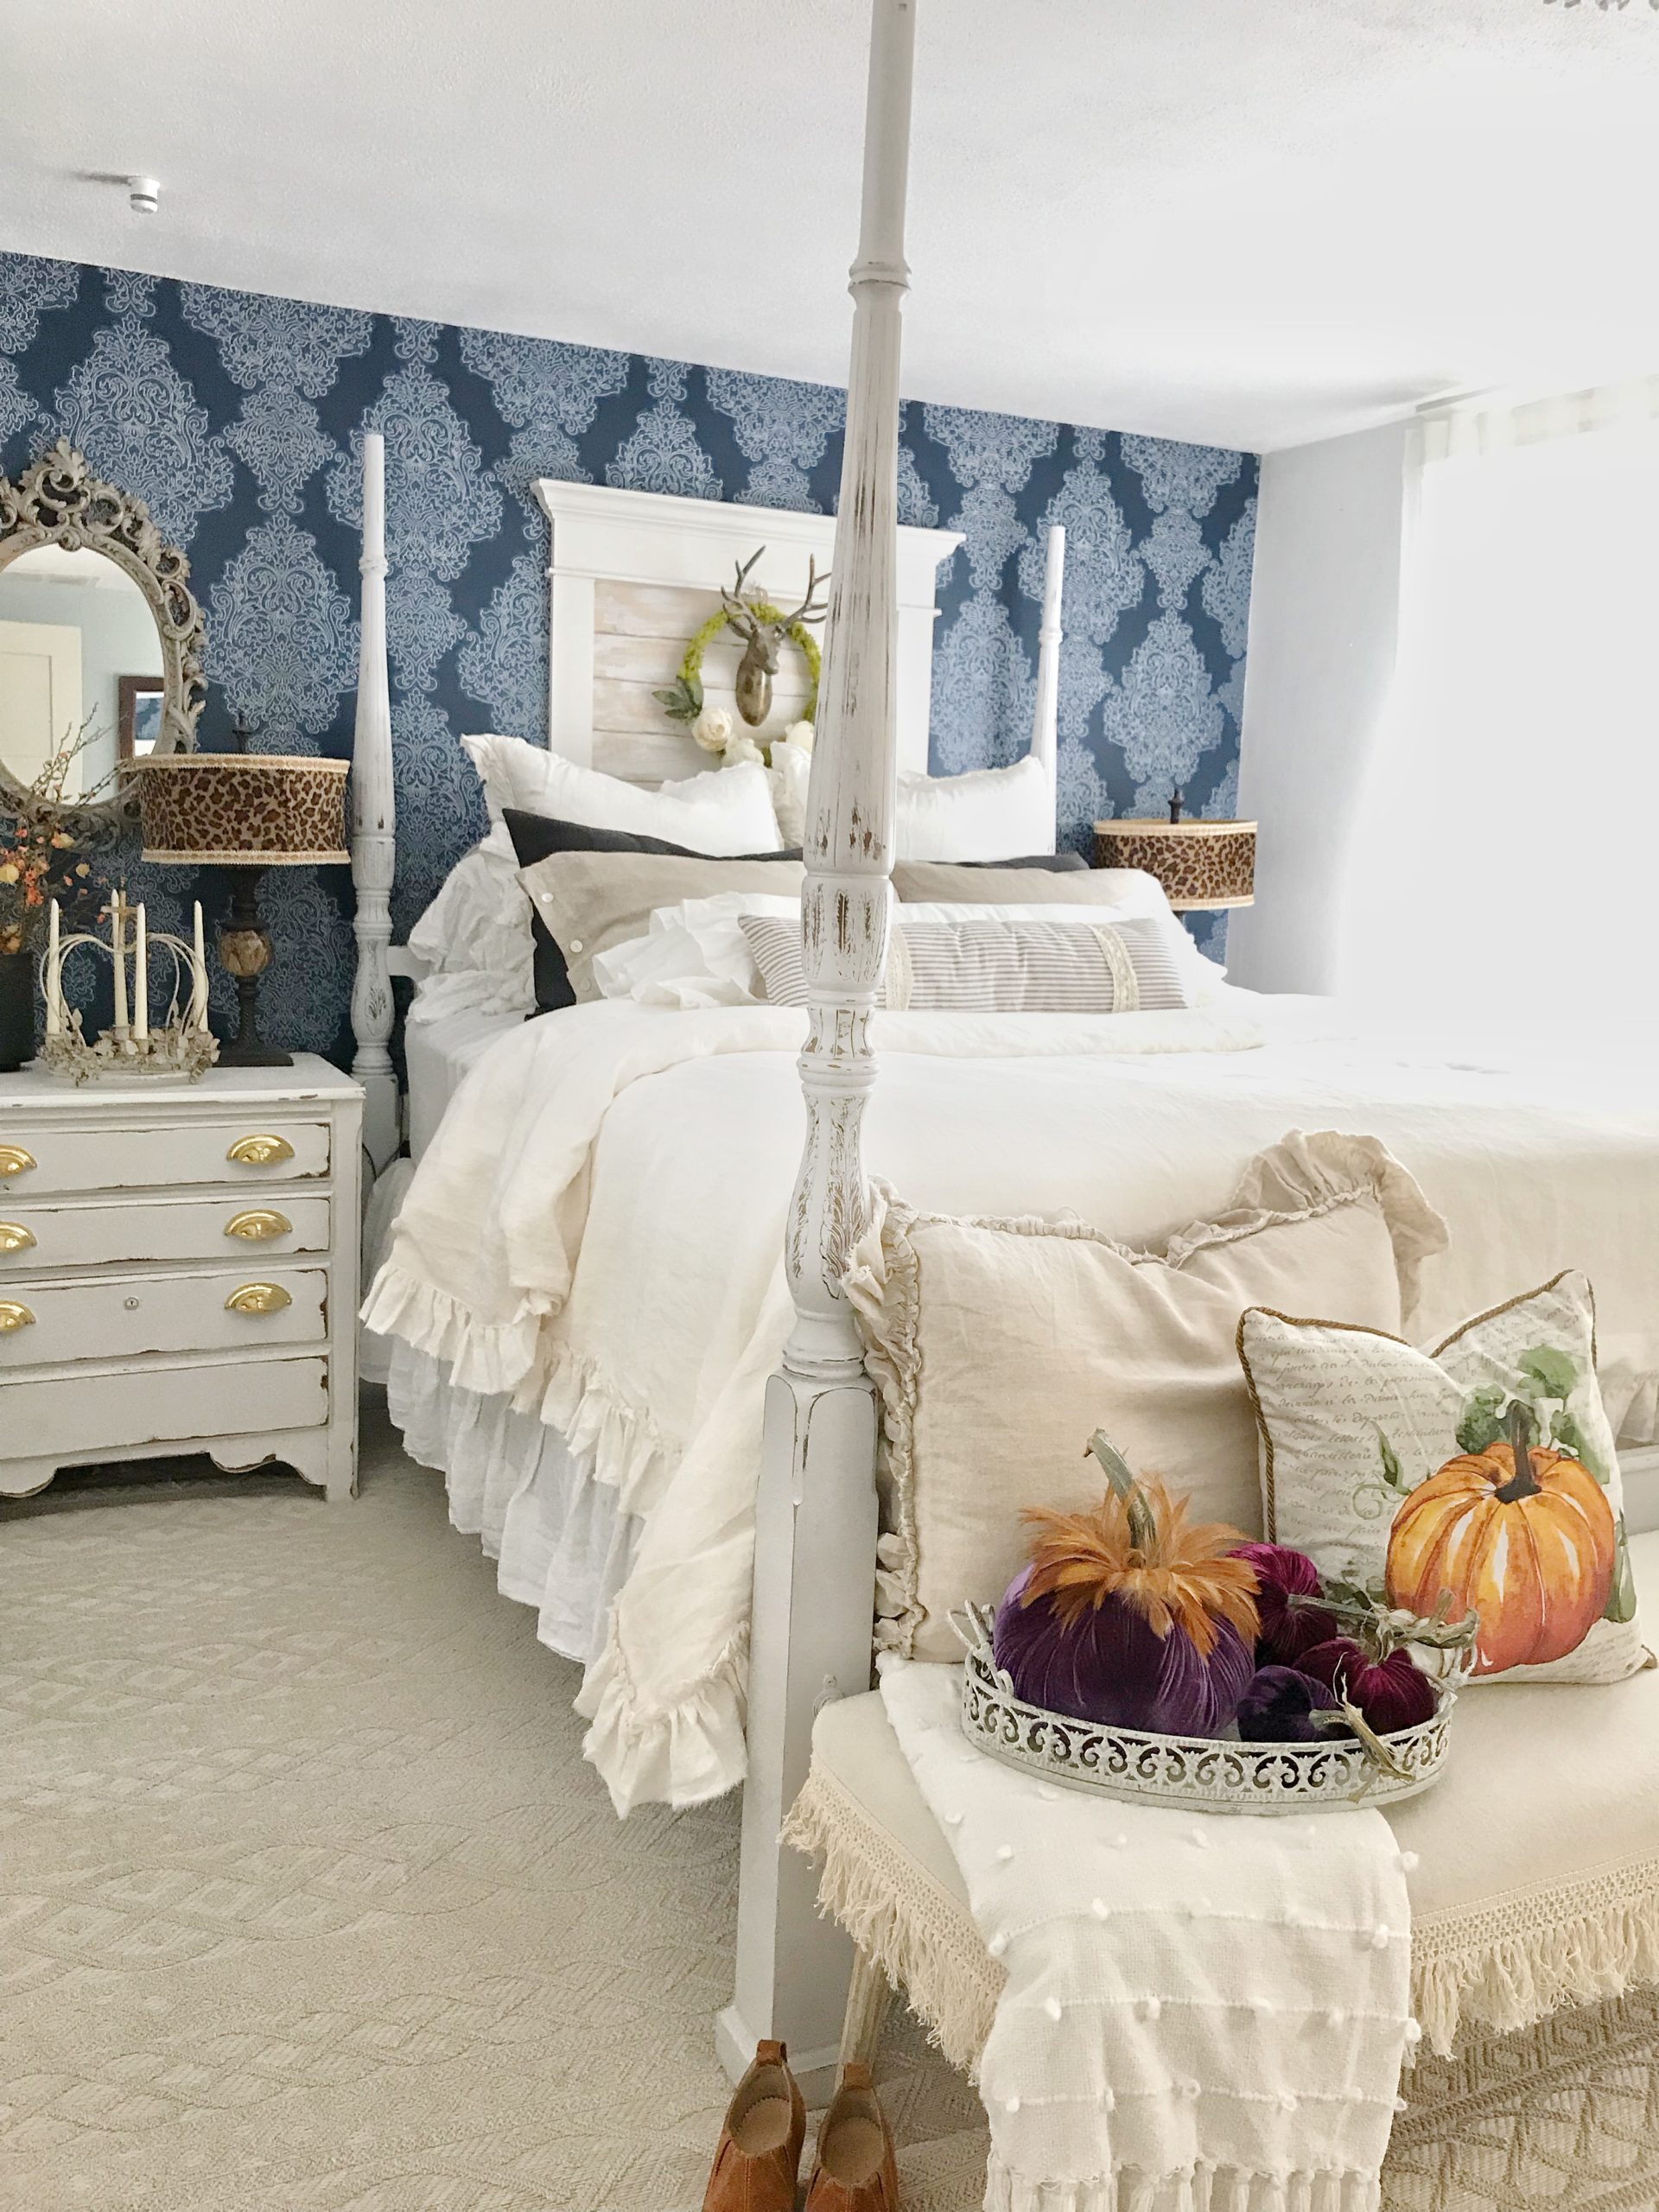 How to Decorate Bedrooms for Easy Fall Decor cream bedding with 8 pillows and velvet pumpkins on bench in front and pumpkin pillow